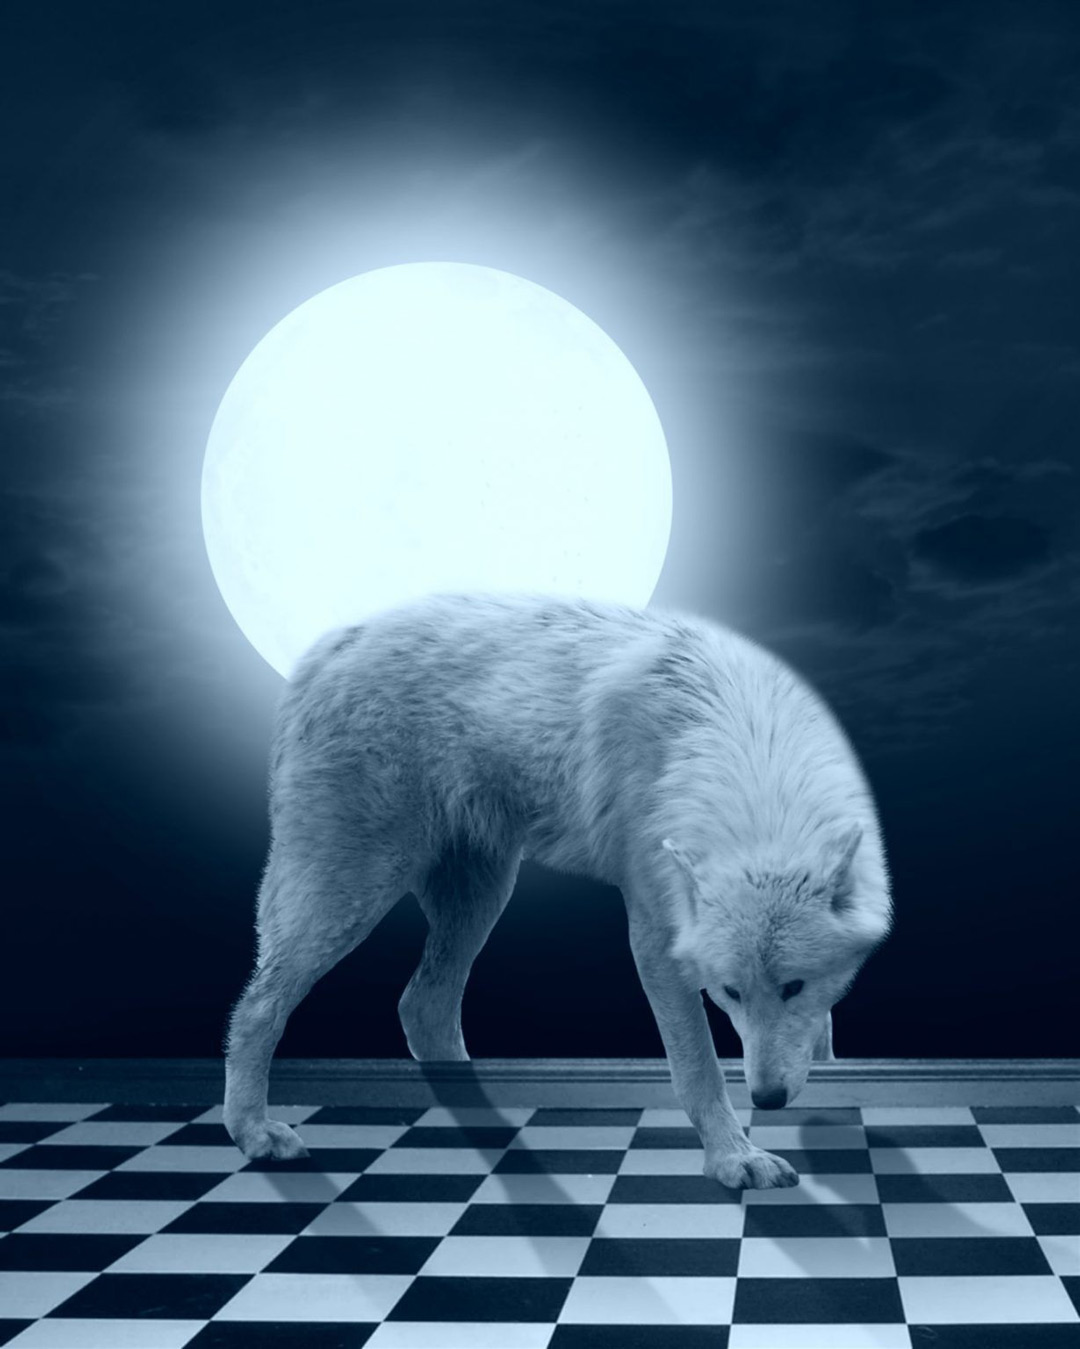 The Arctic Wolf PicsArt Background Free Stock Image